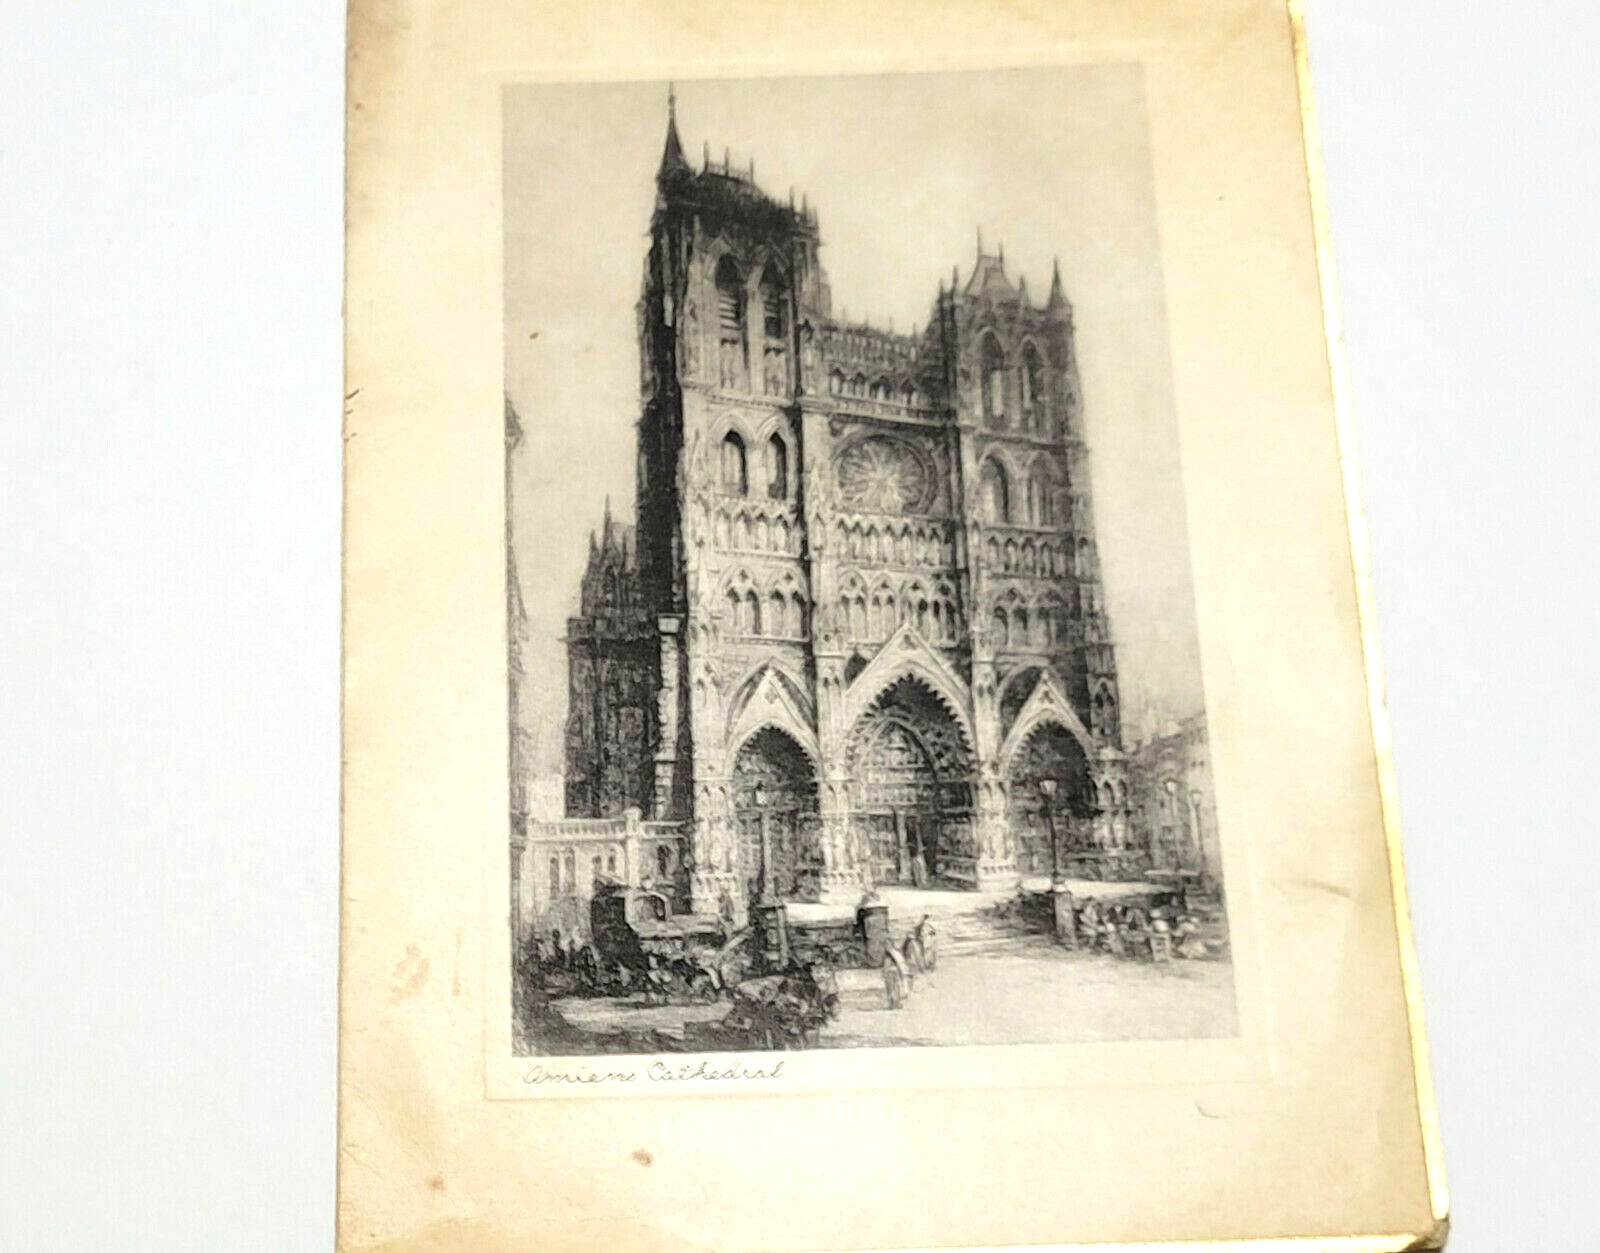 Jessie Younger Family Card Amiens Cathedral France Jesse James Family